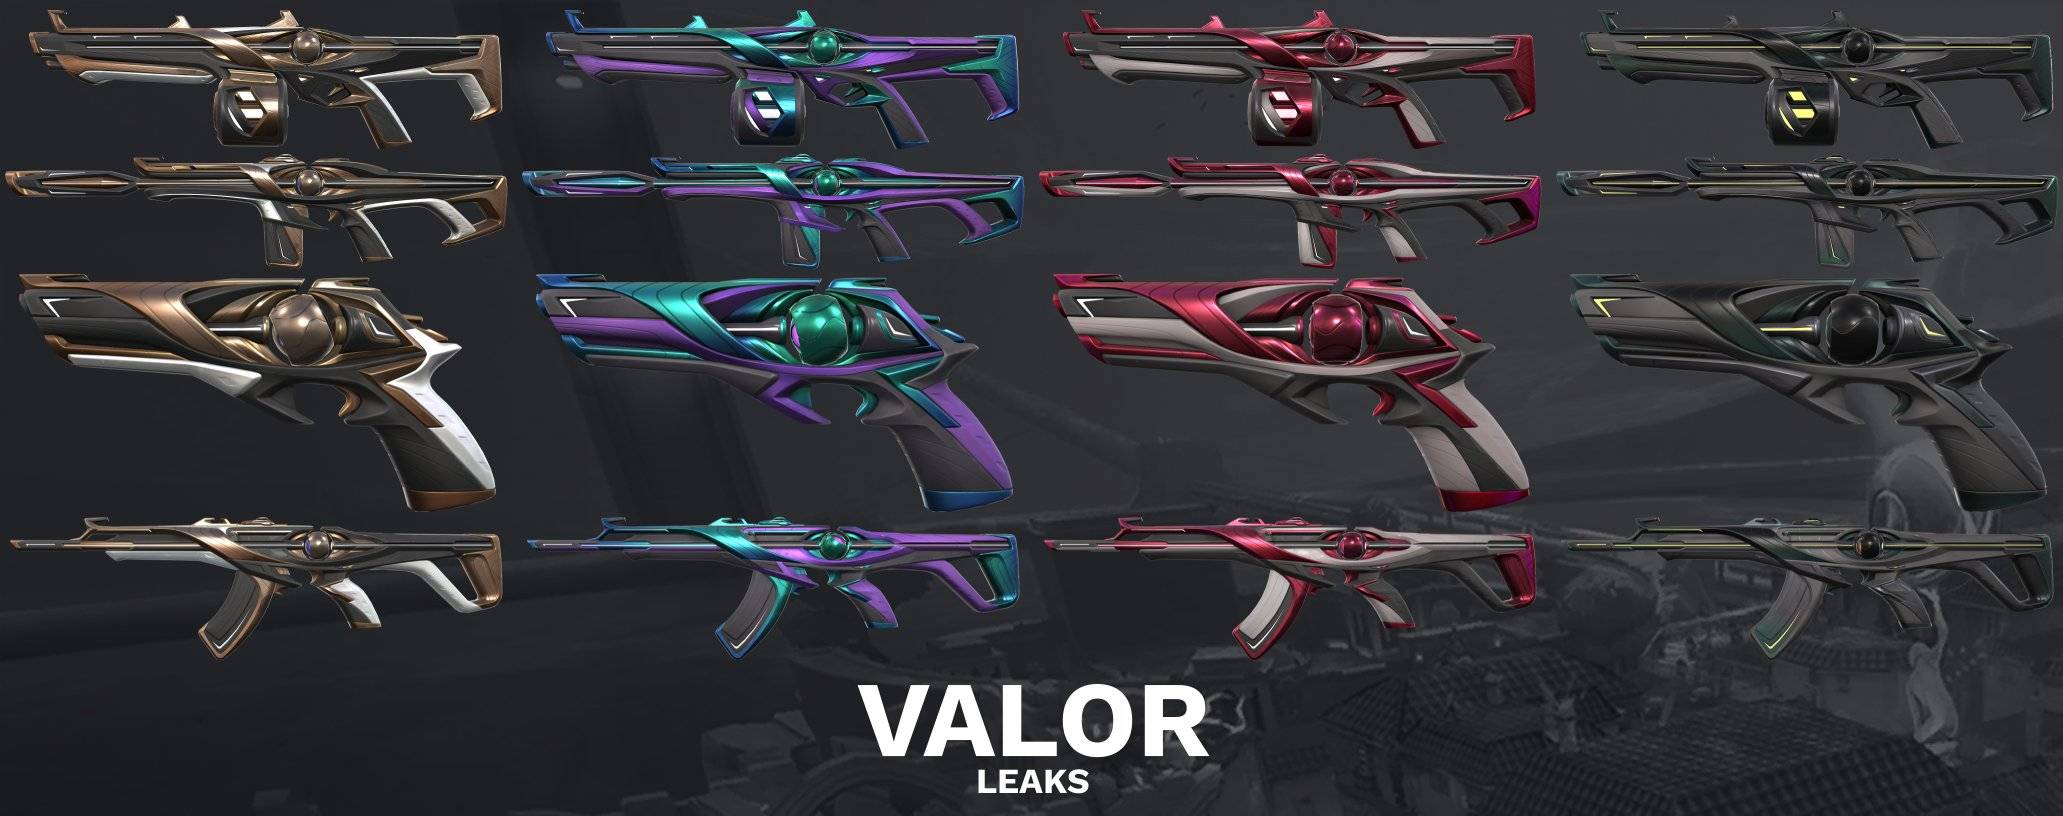 Valorant patch notes: 5.06 update finally changes Pearl